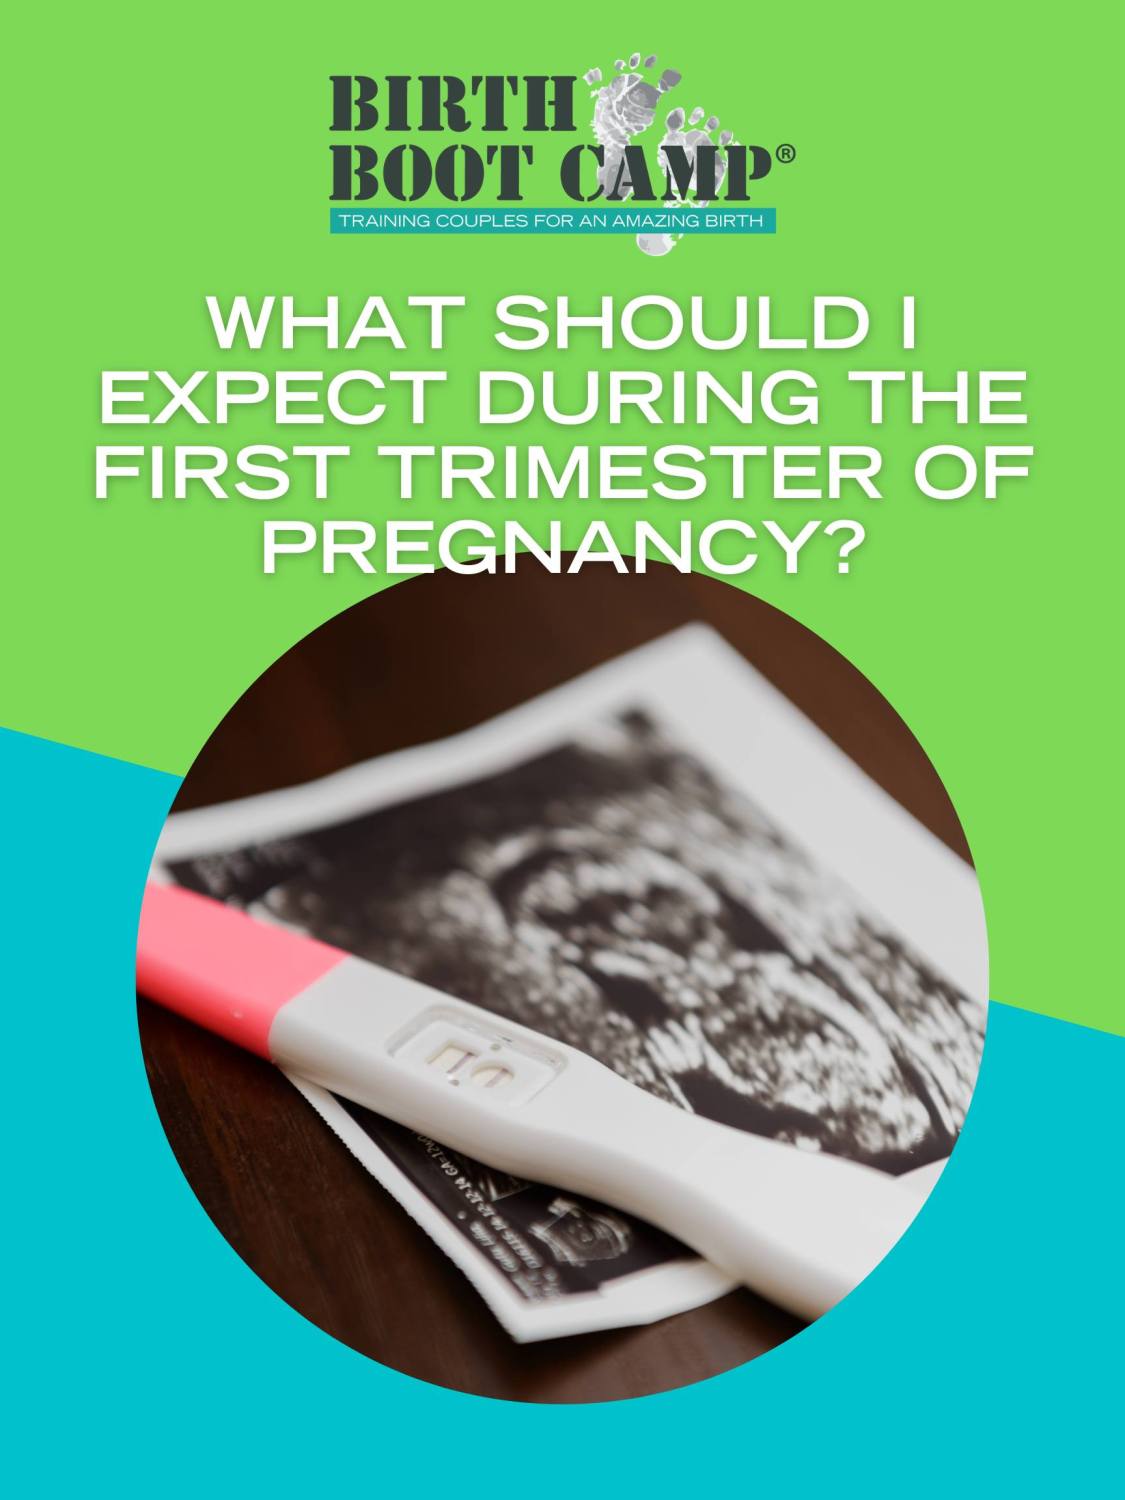 What Should I Expect During the First Trimester of Pregnancy?